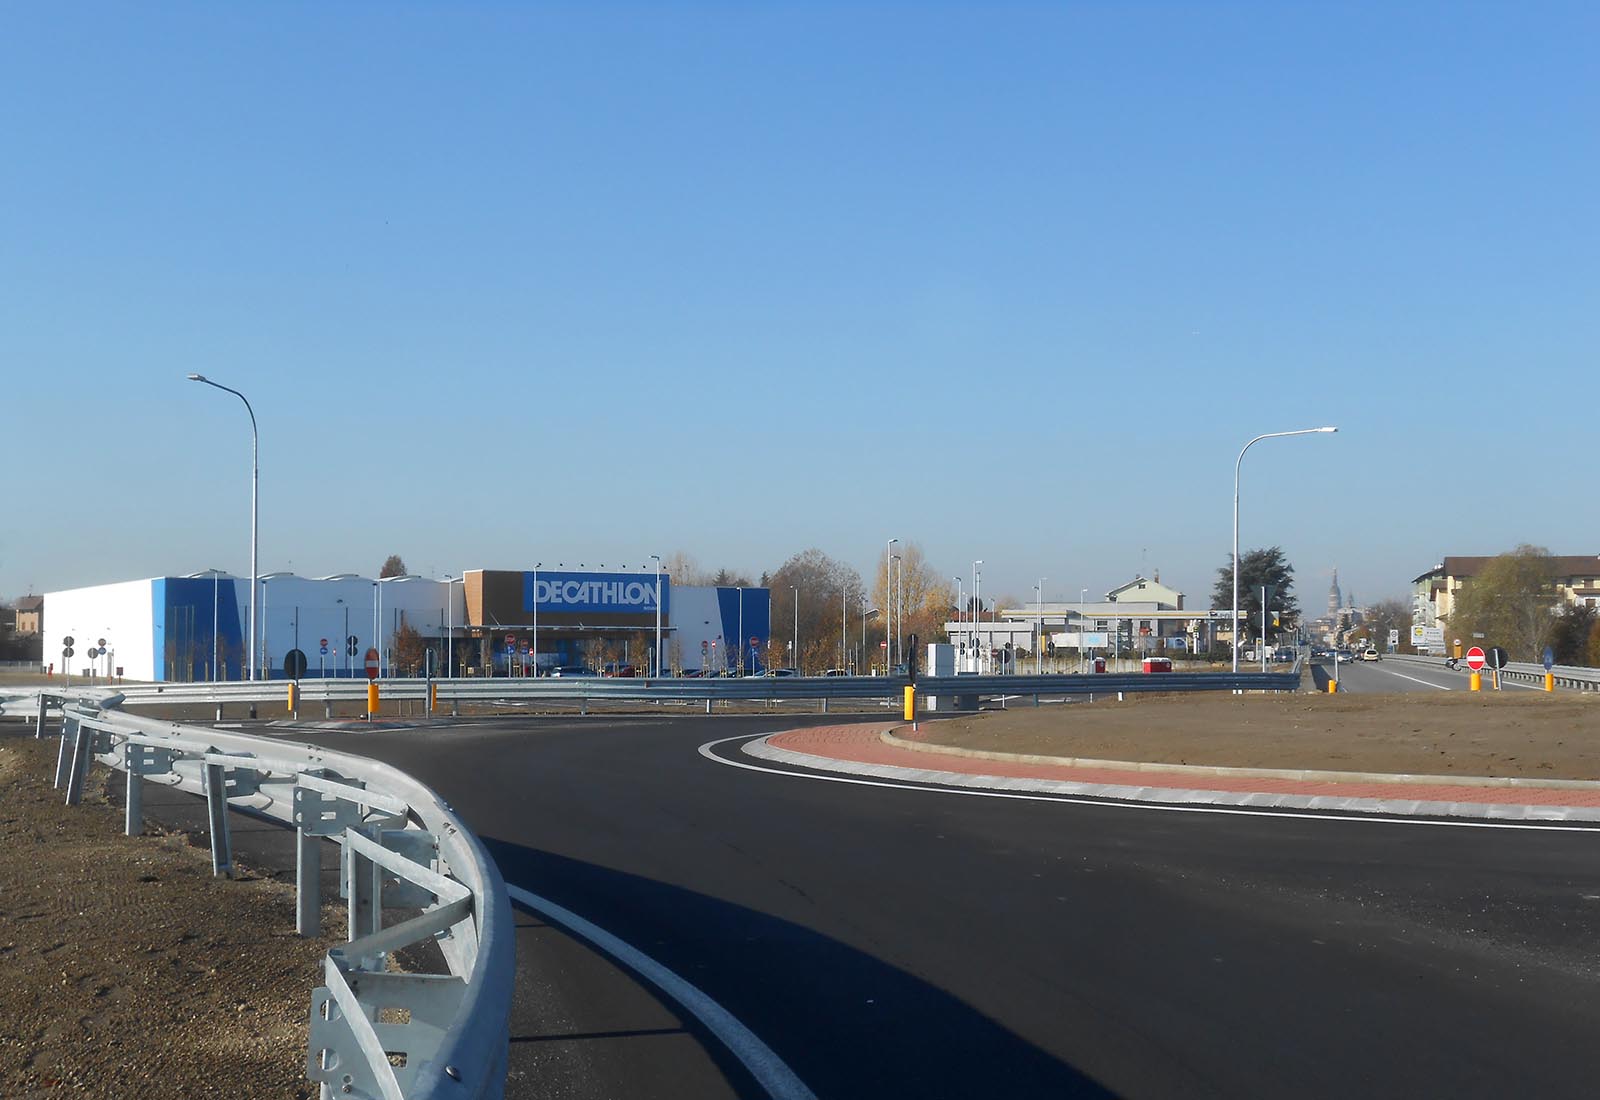 Decathlon Novara - The shopping center seen from the roundabout